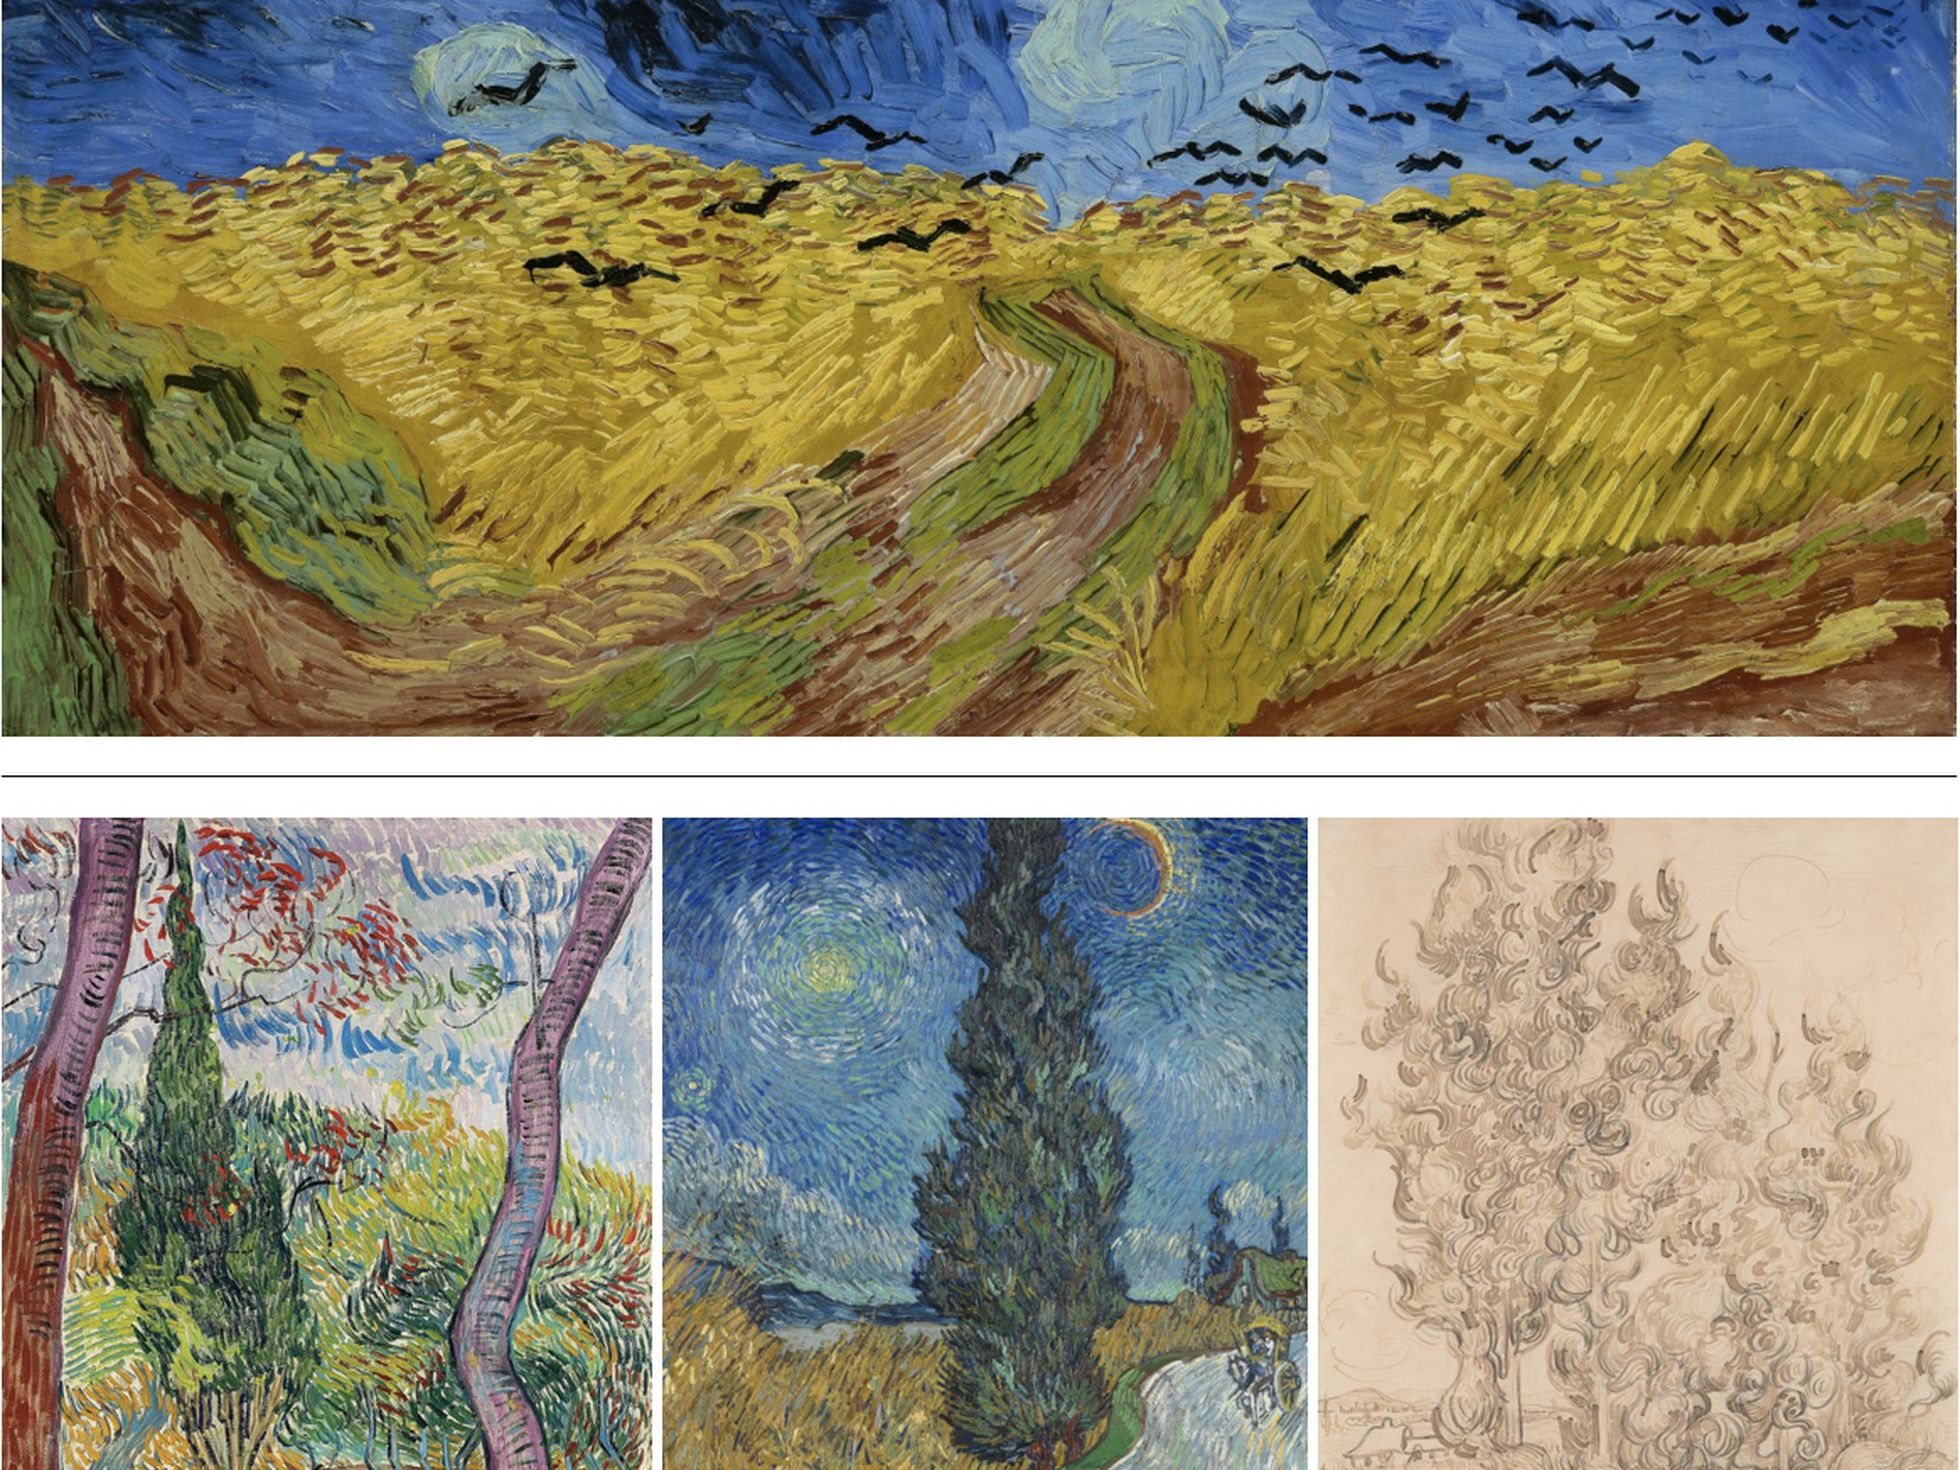 Van Gogh Art Style - A Look at His Artistic Expressions